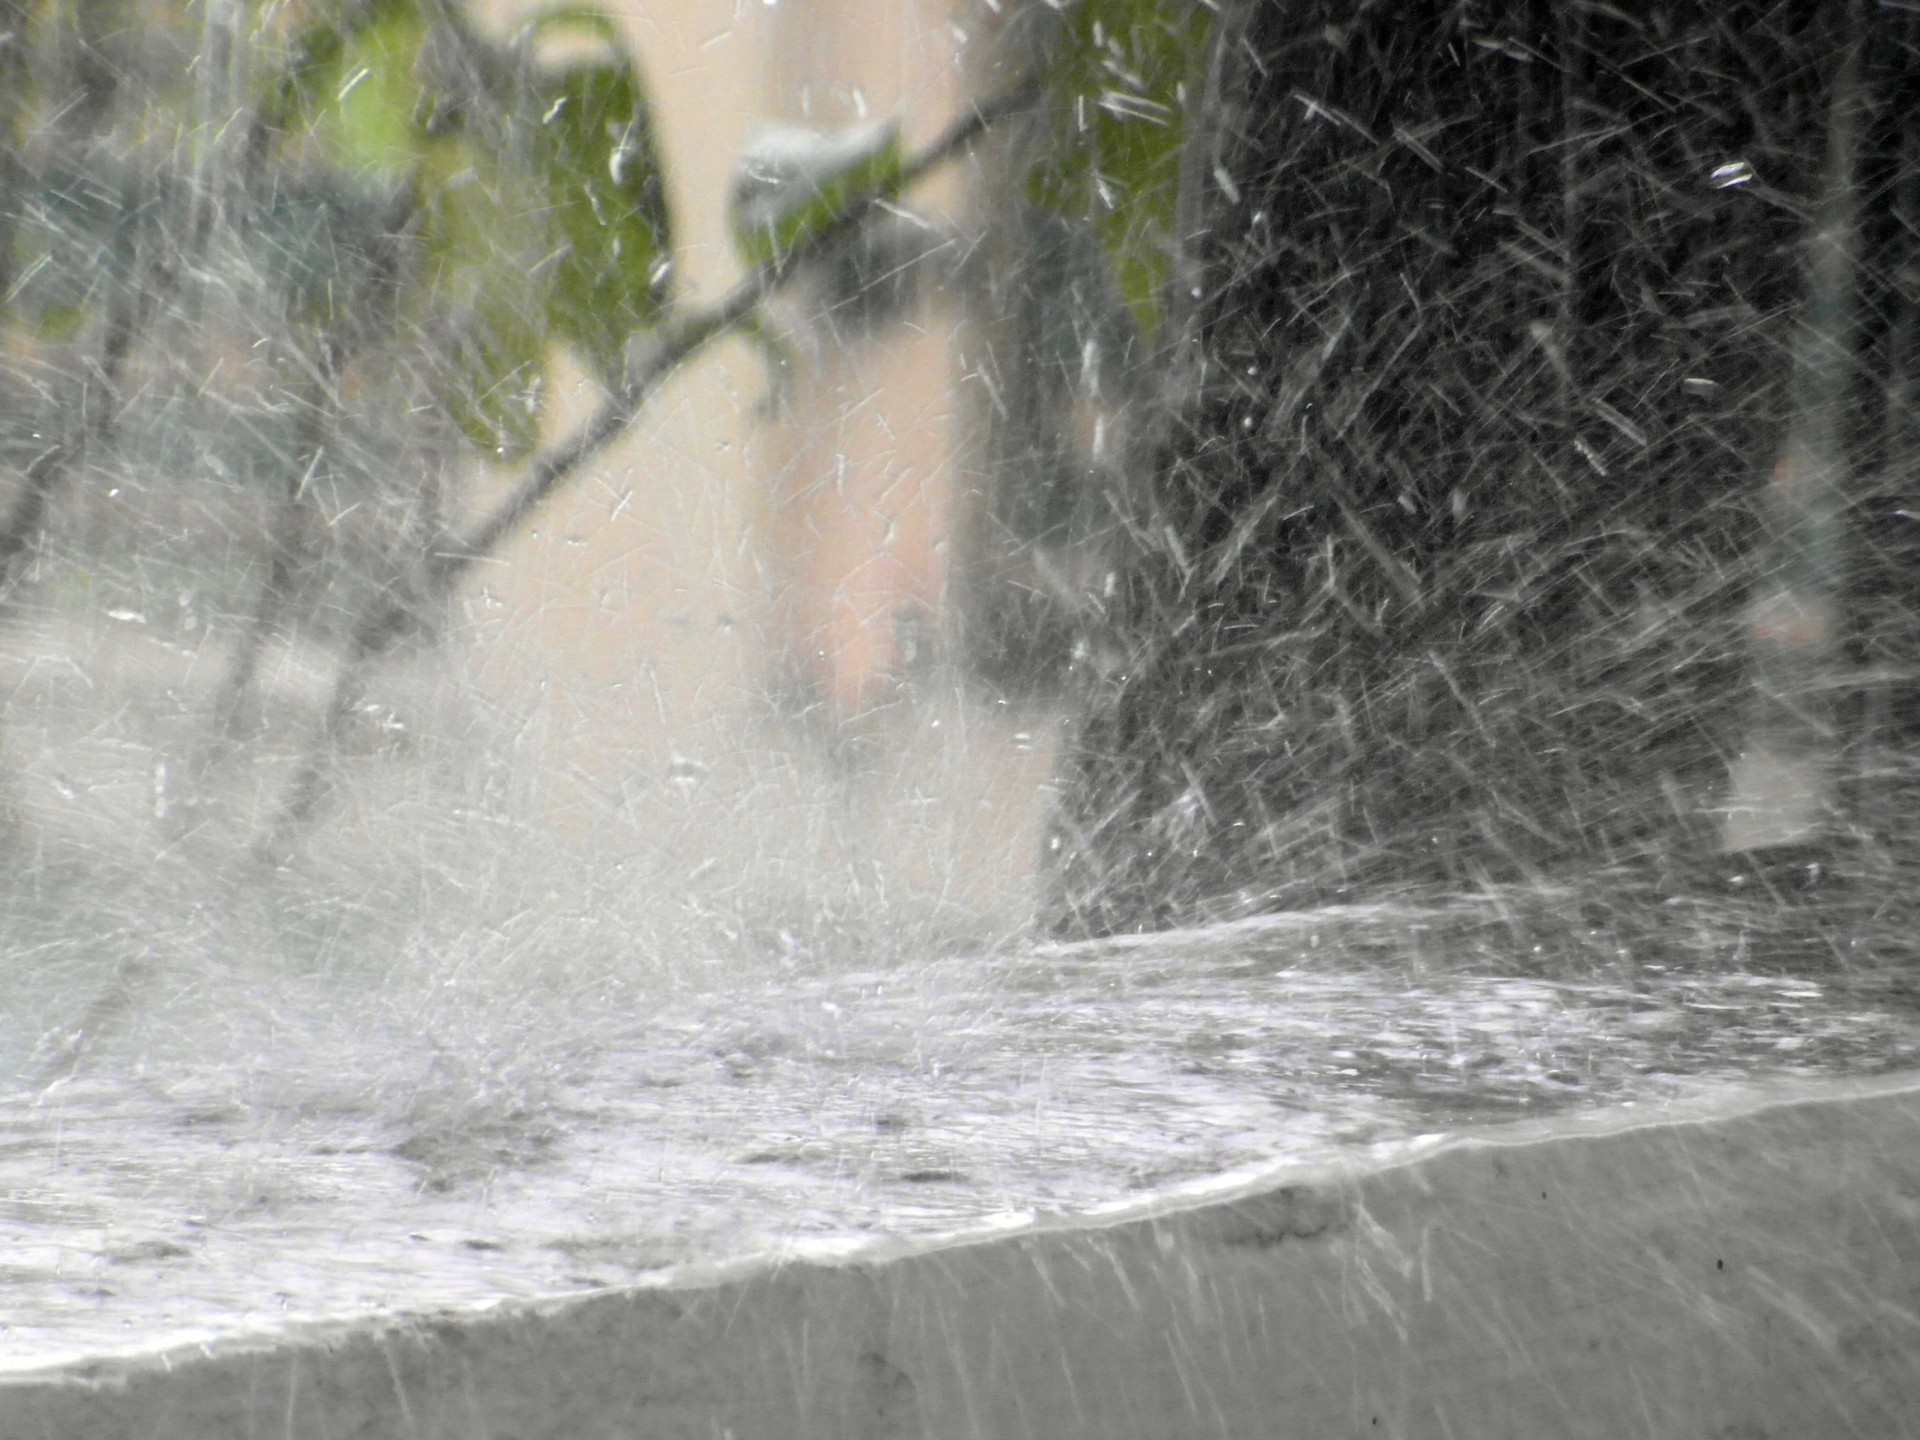 During the Rainy Season, is There Anything Like Too Much Rain?